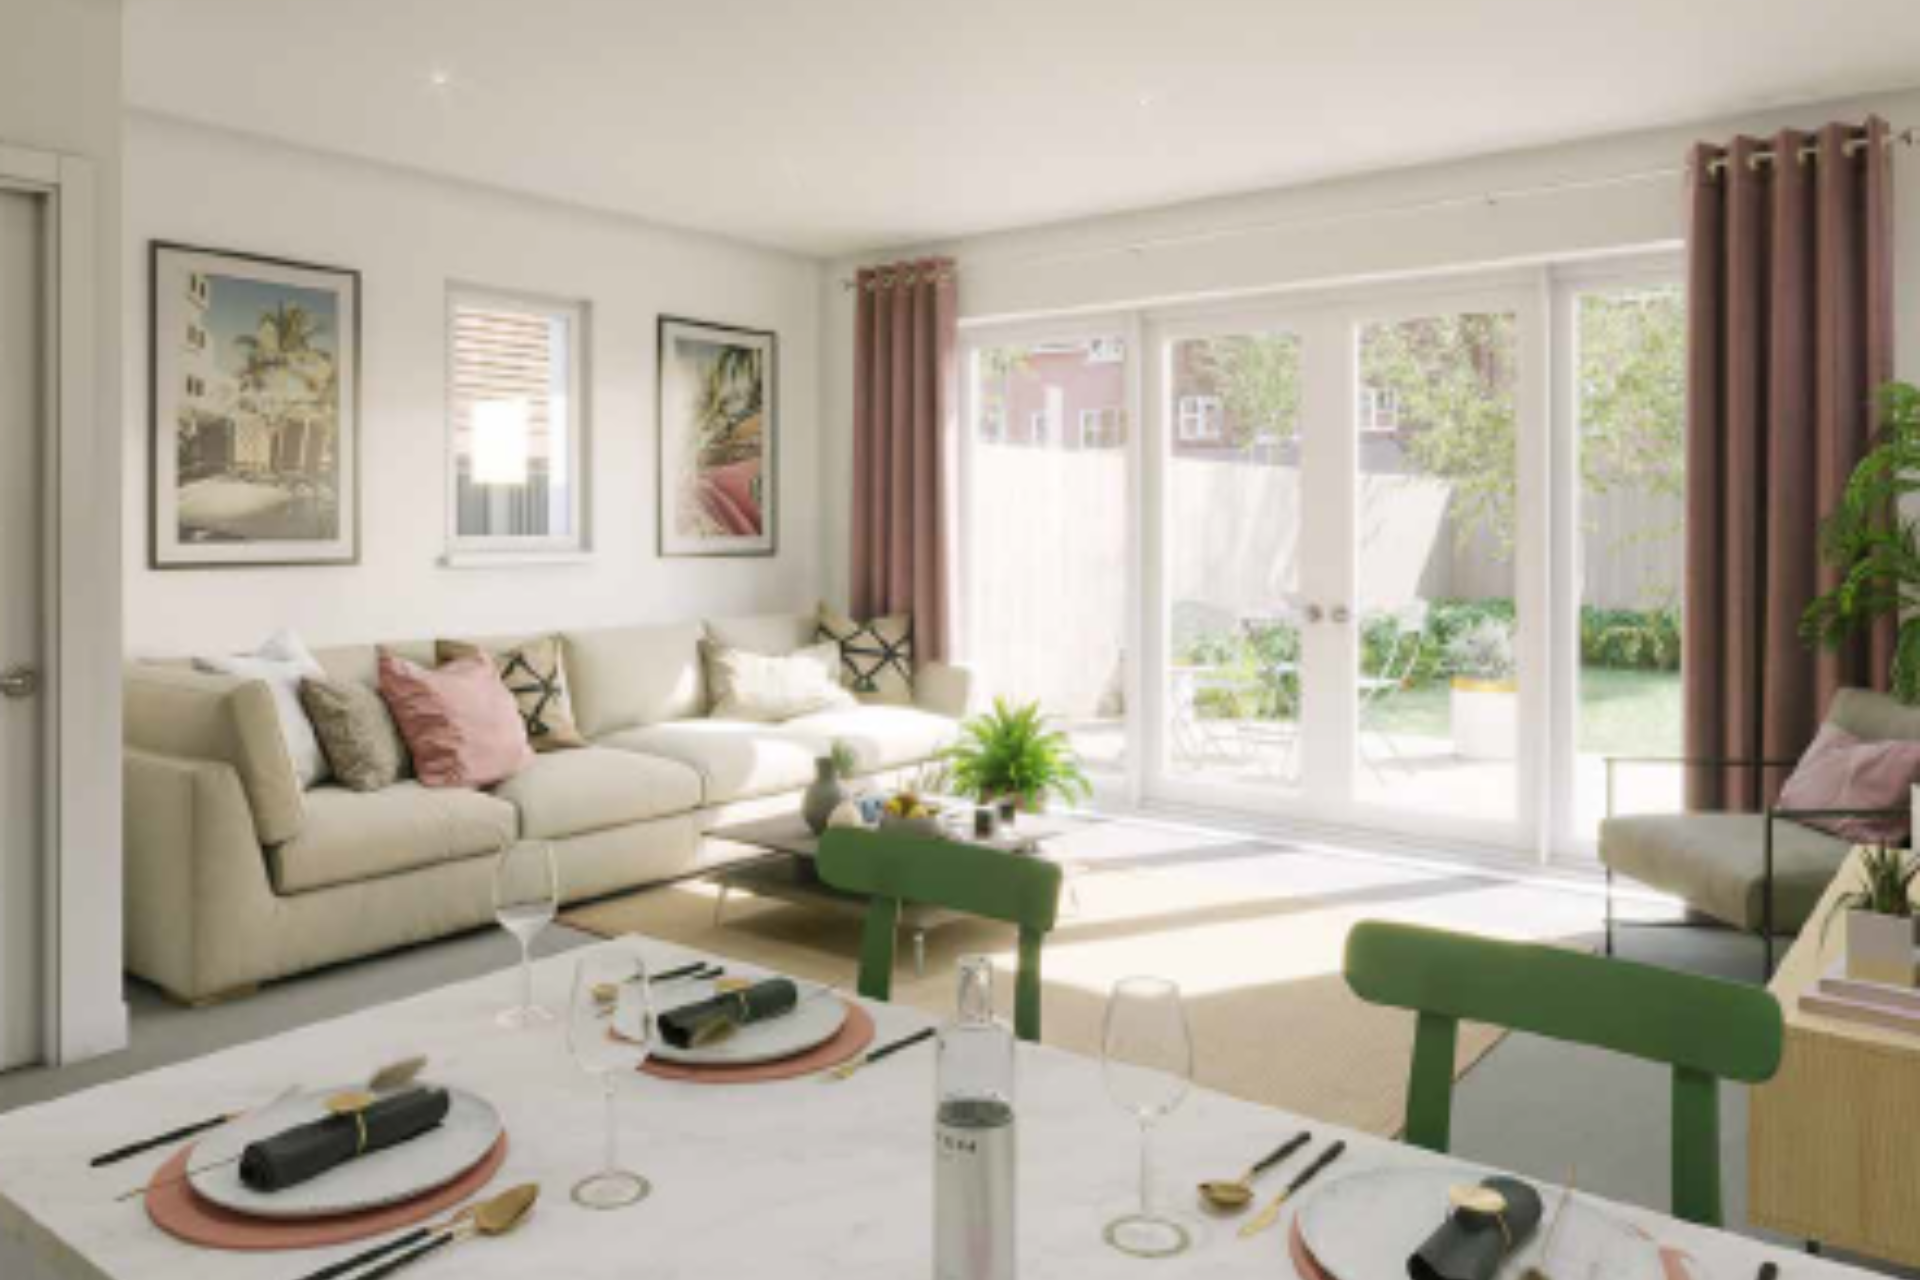 Bright and airy living space with a beige sofa, dining area set for two, and large patio doors opening to a garden.